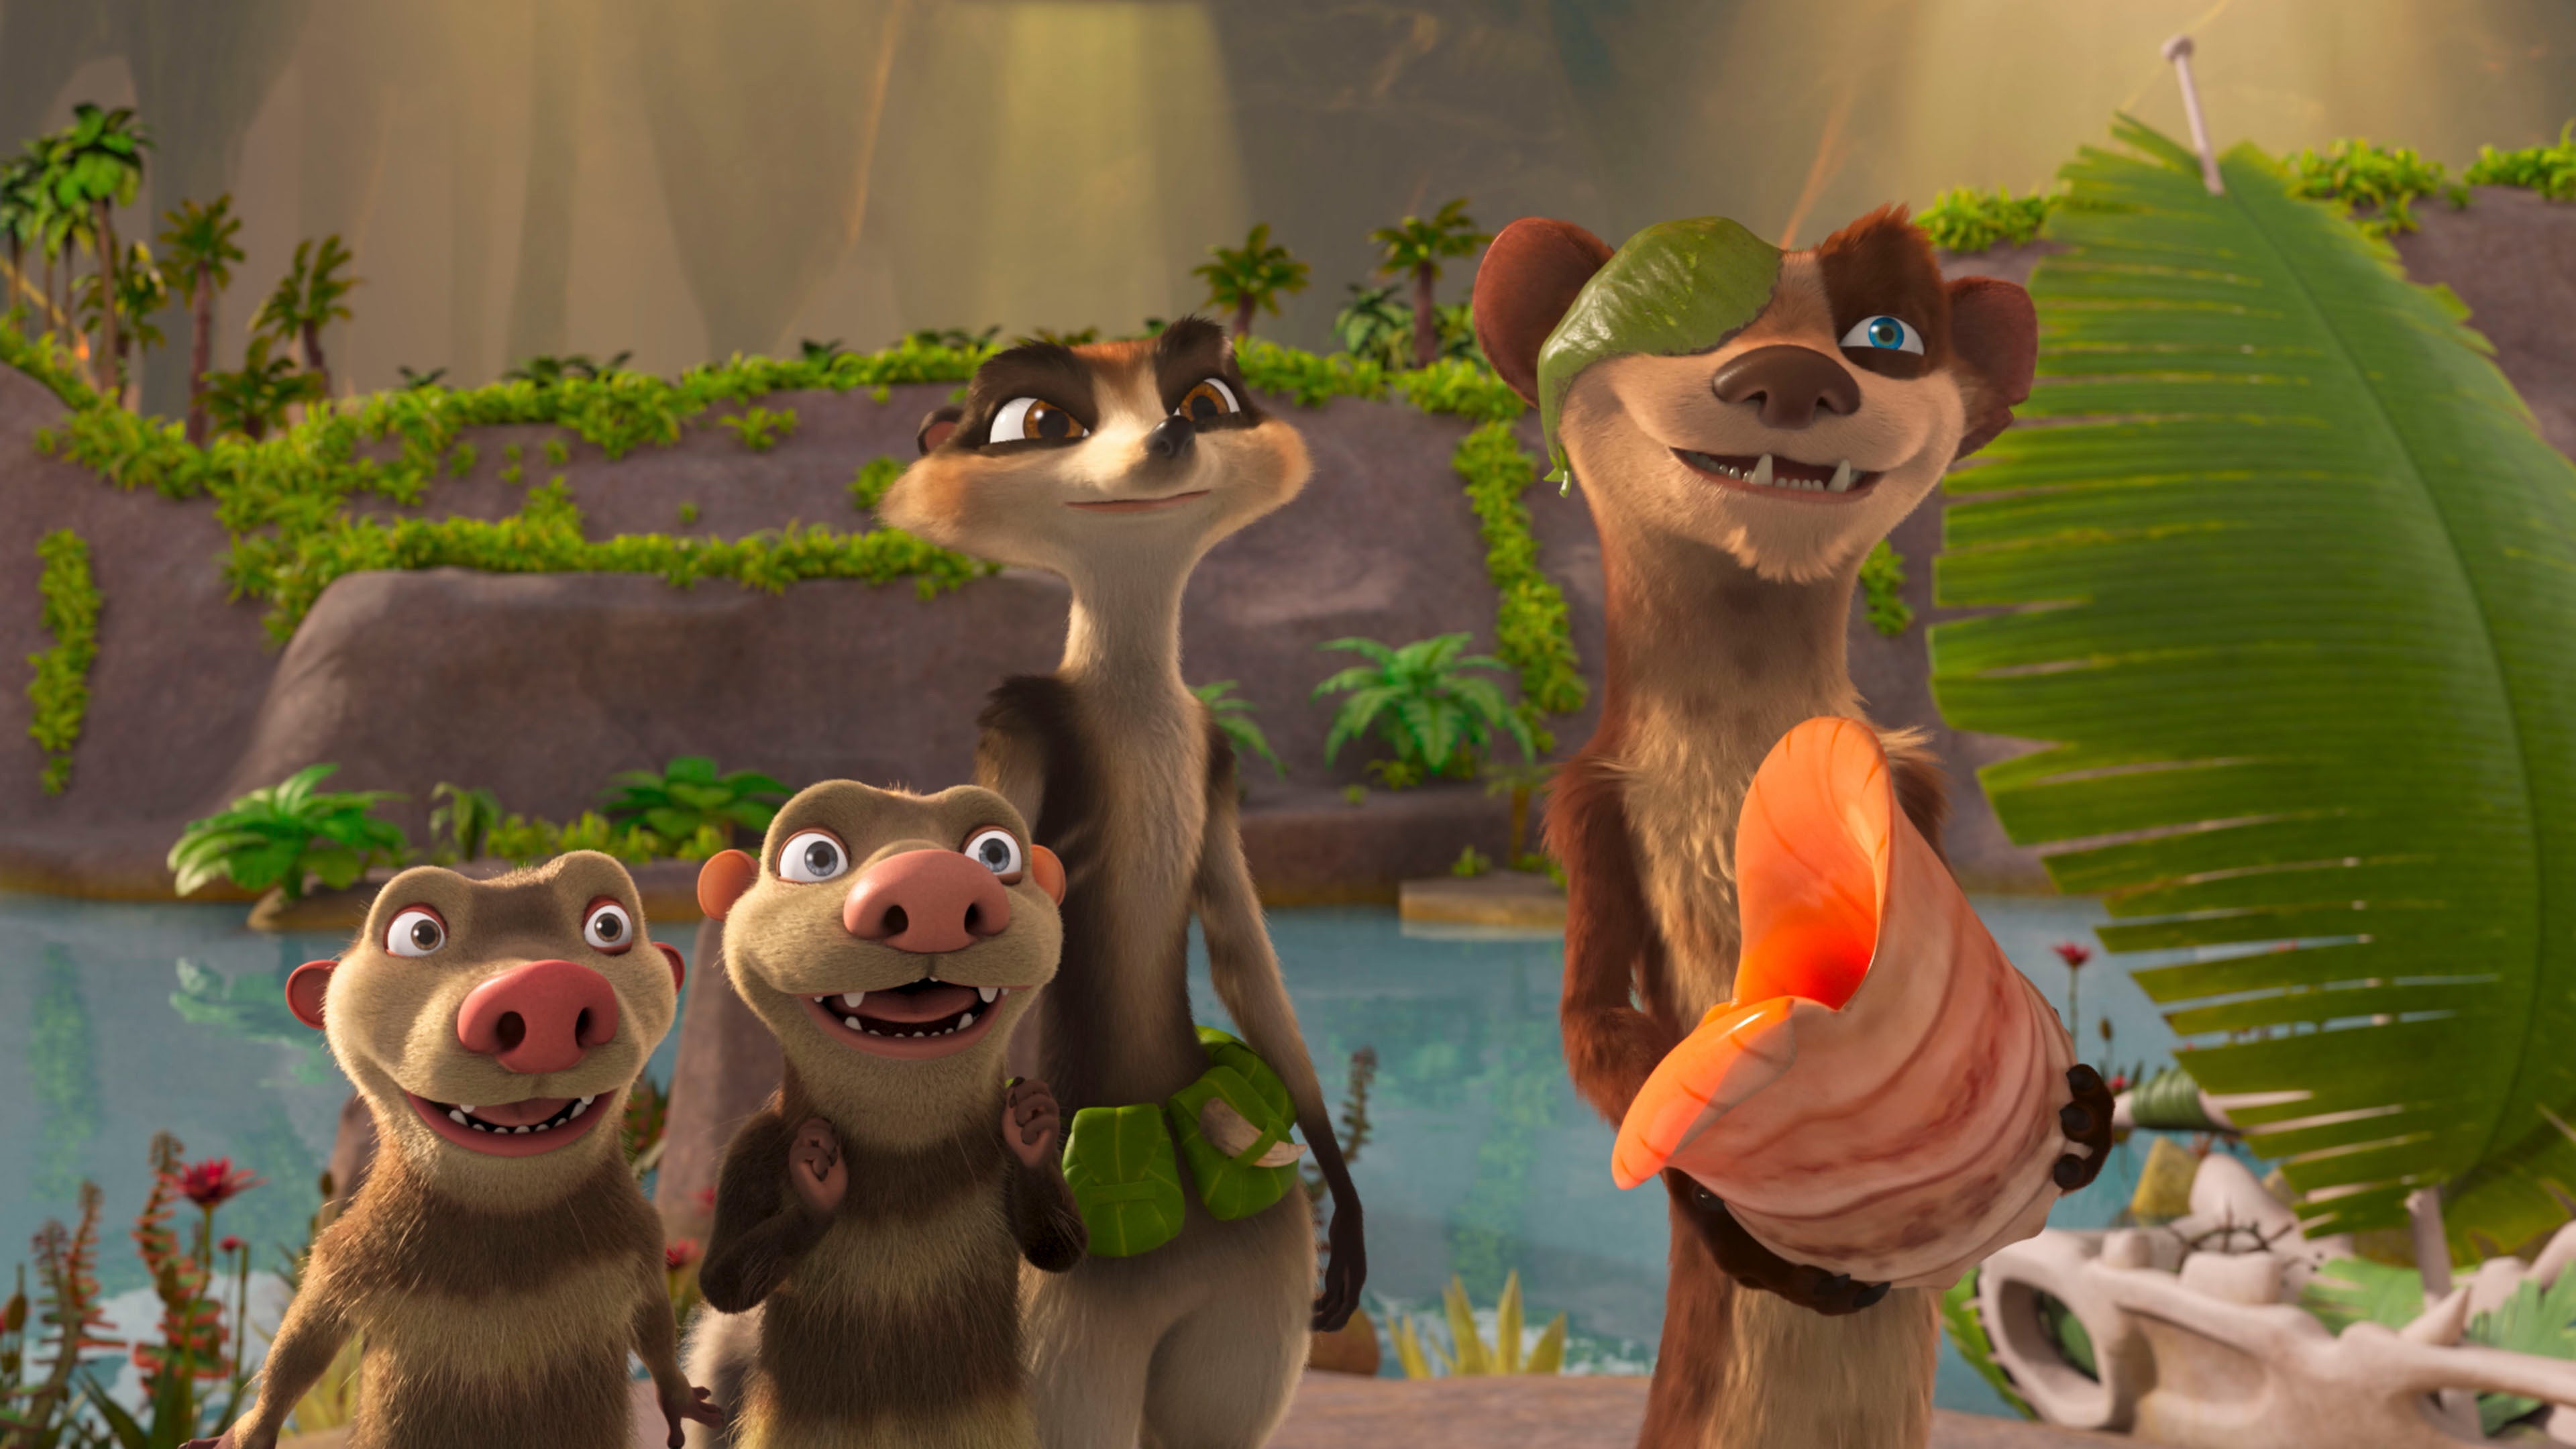 Film Review - The Ice Age Adventures of Buck Wild